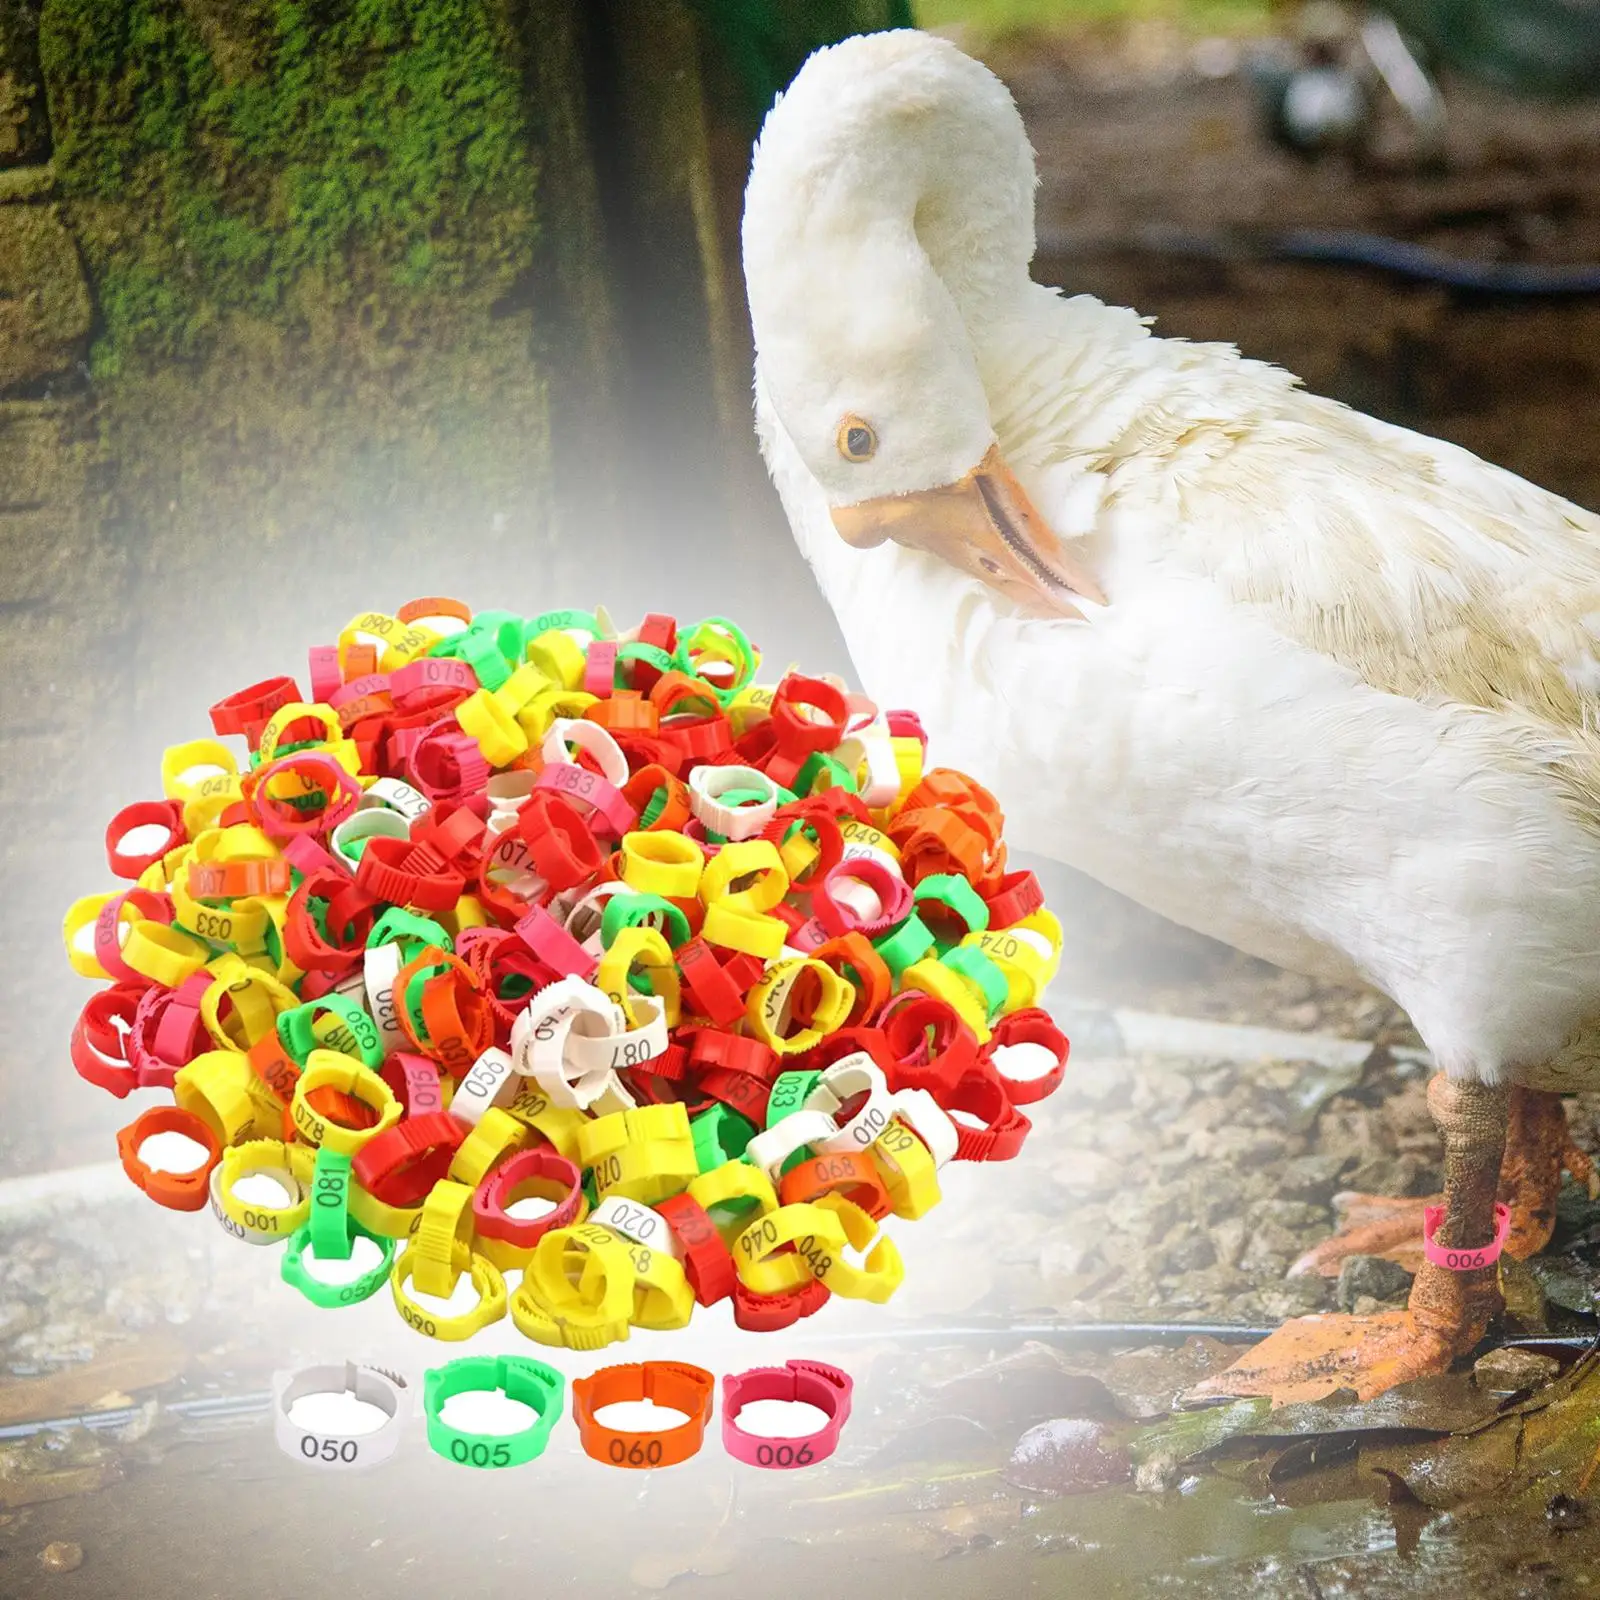 100x Poultry Foot Bands, Poultry Foot Rings, Chicken Identification Band for Birds